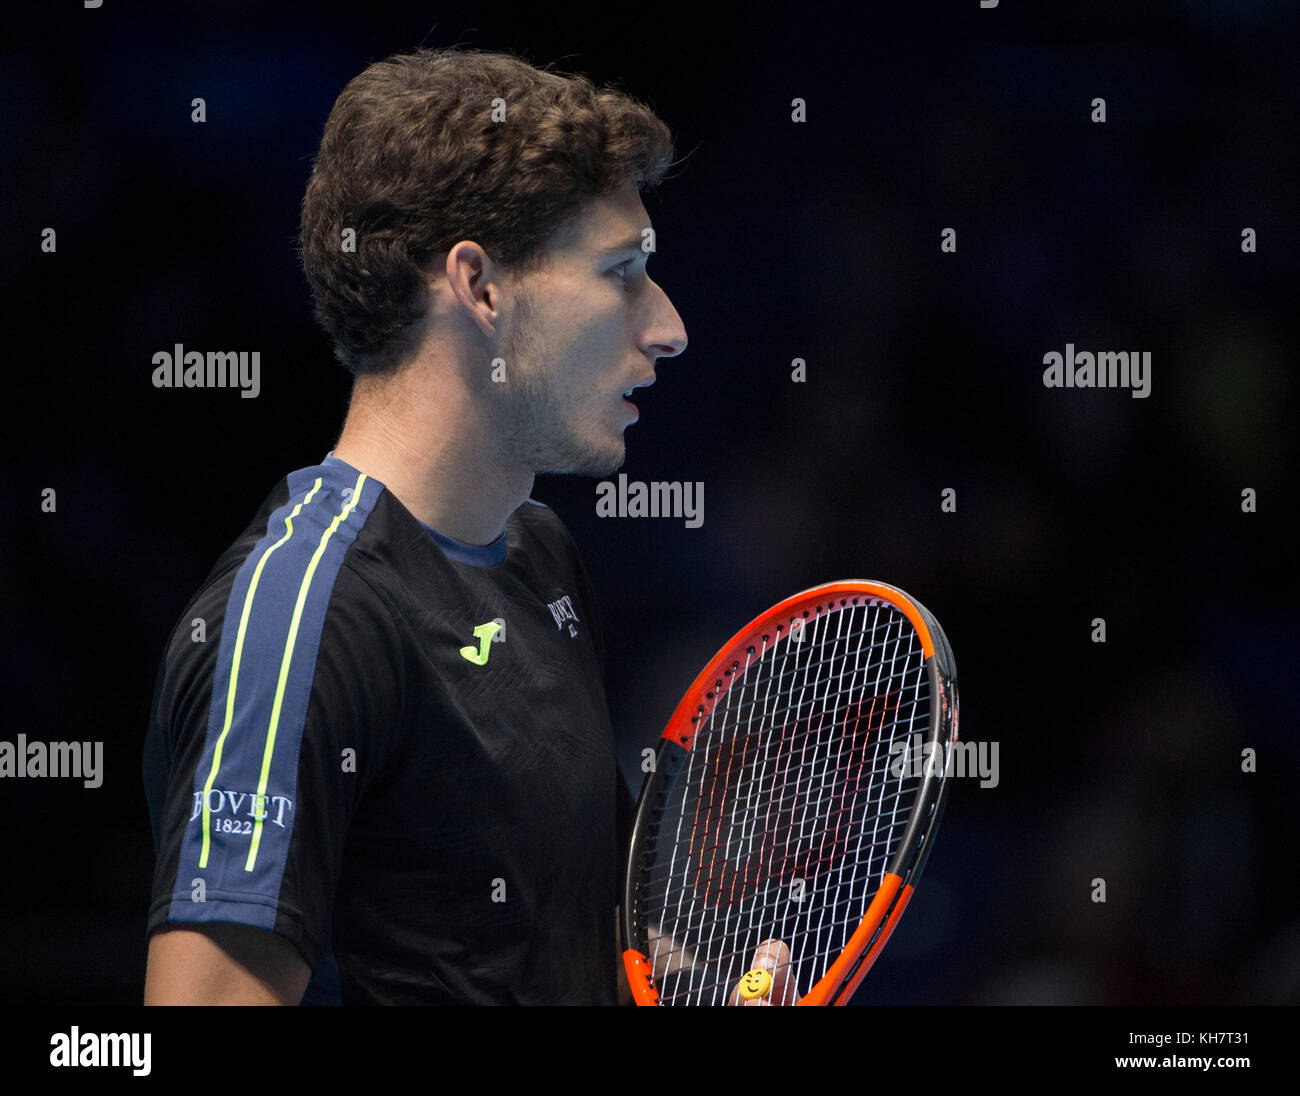 O2, London, UK. 15 November, 2017. Day 4 of the Nitto ATP Finals, evening singles match, Pablo Carreno Busta (ESP) vs Dominic Thiem (AUT). Busta’s first match as a stand-in for Rafael Nadal who pulled out of the tournament on 13 November through injury. Thiem is match winner 6-3 3-6 6-4. Credit: Malcolm Park/Alamy Live News. Stock Photo